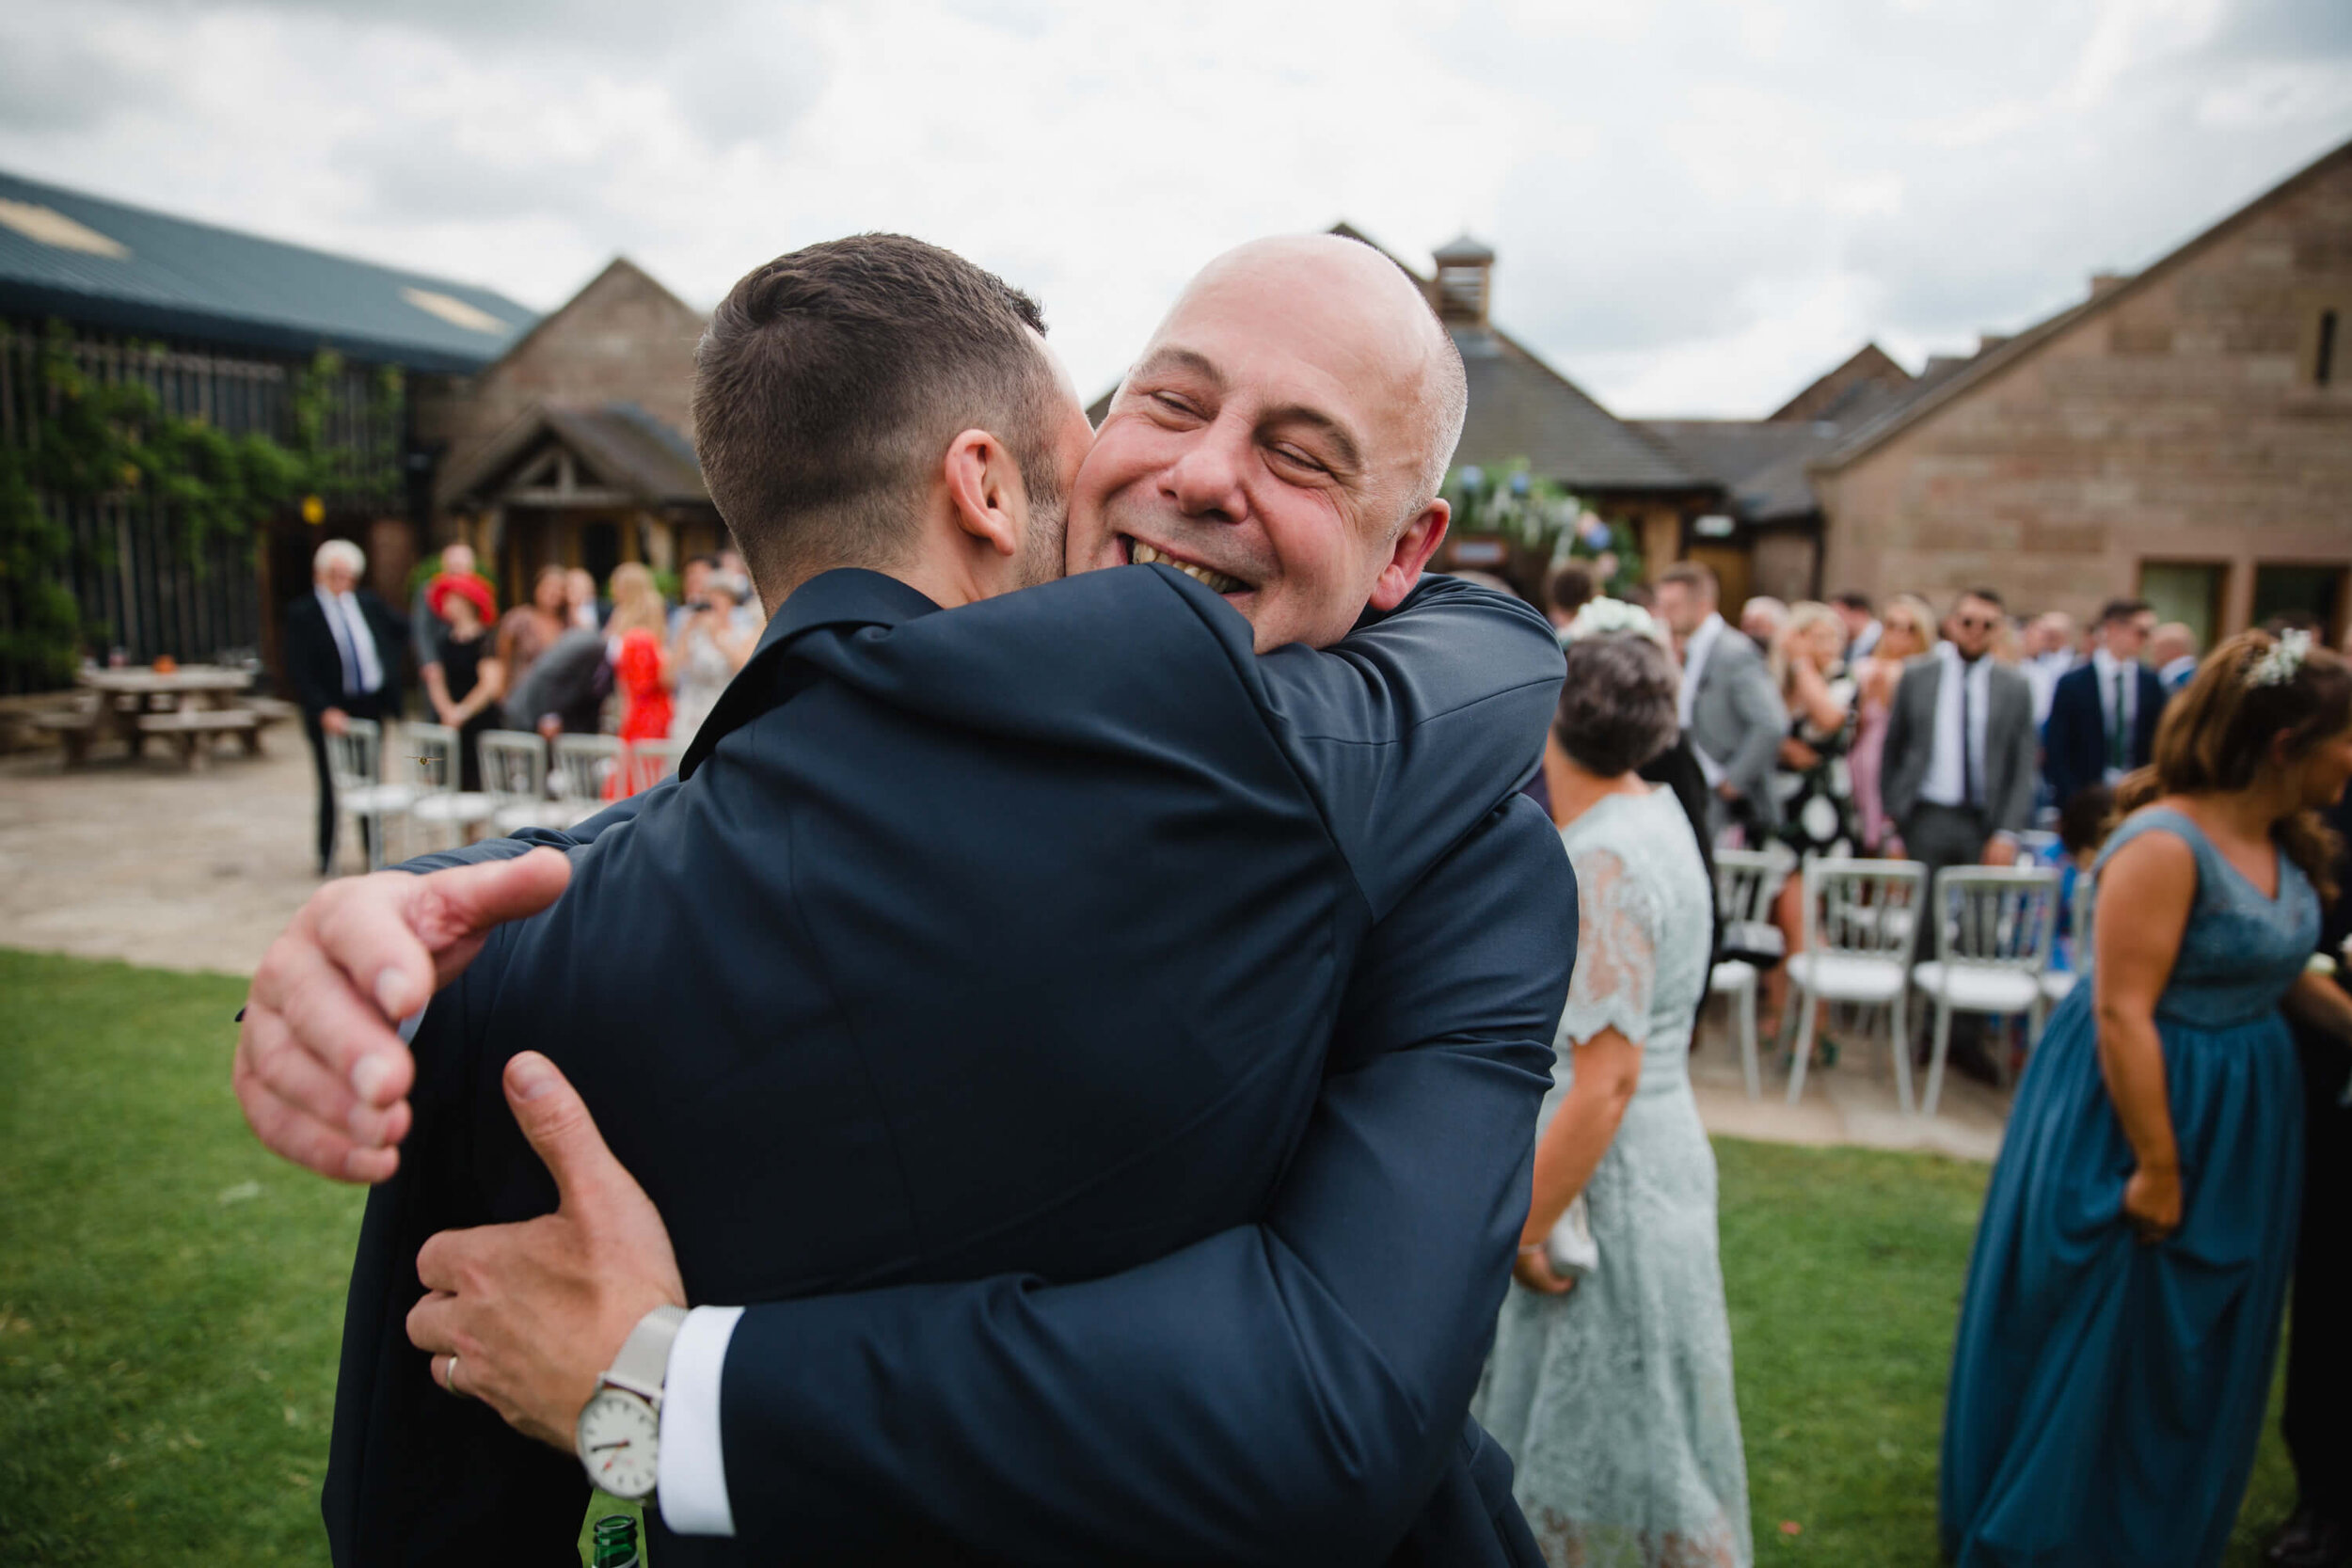 father of groom hugging son after service concludes